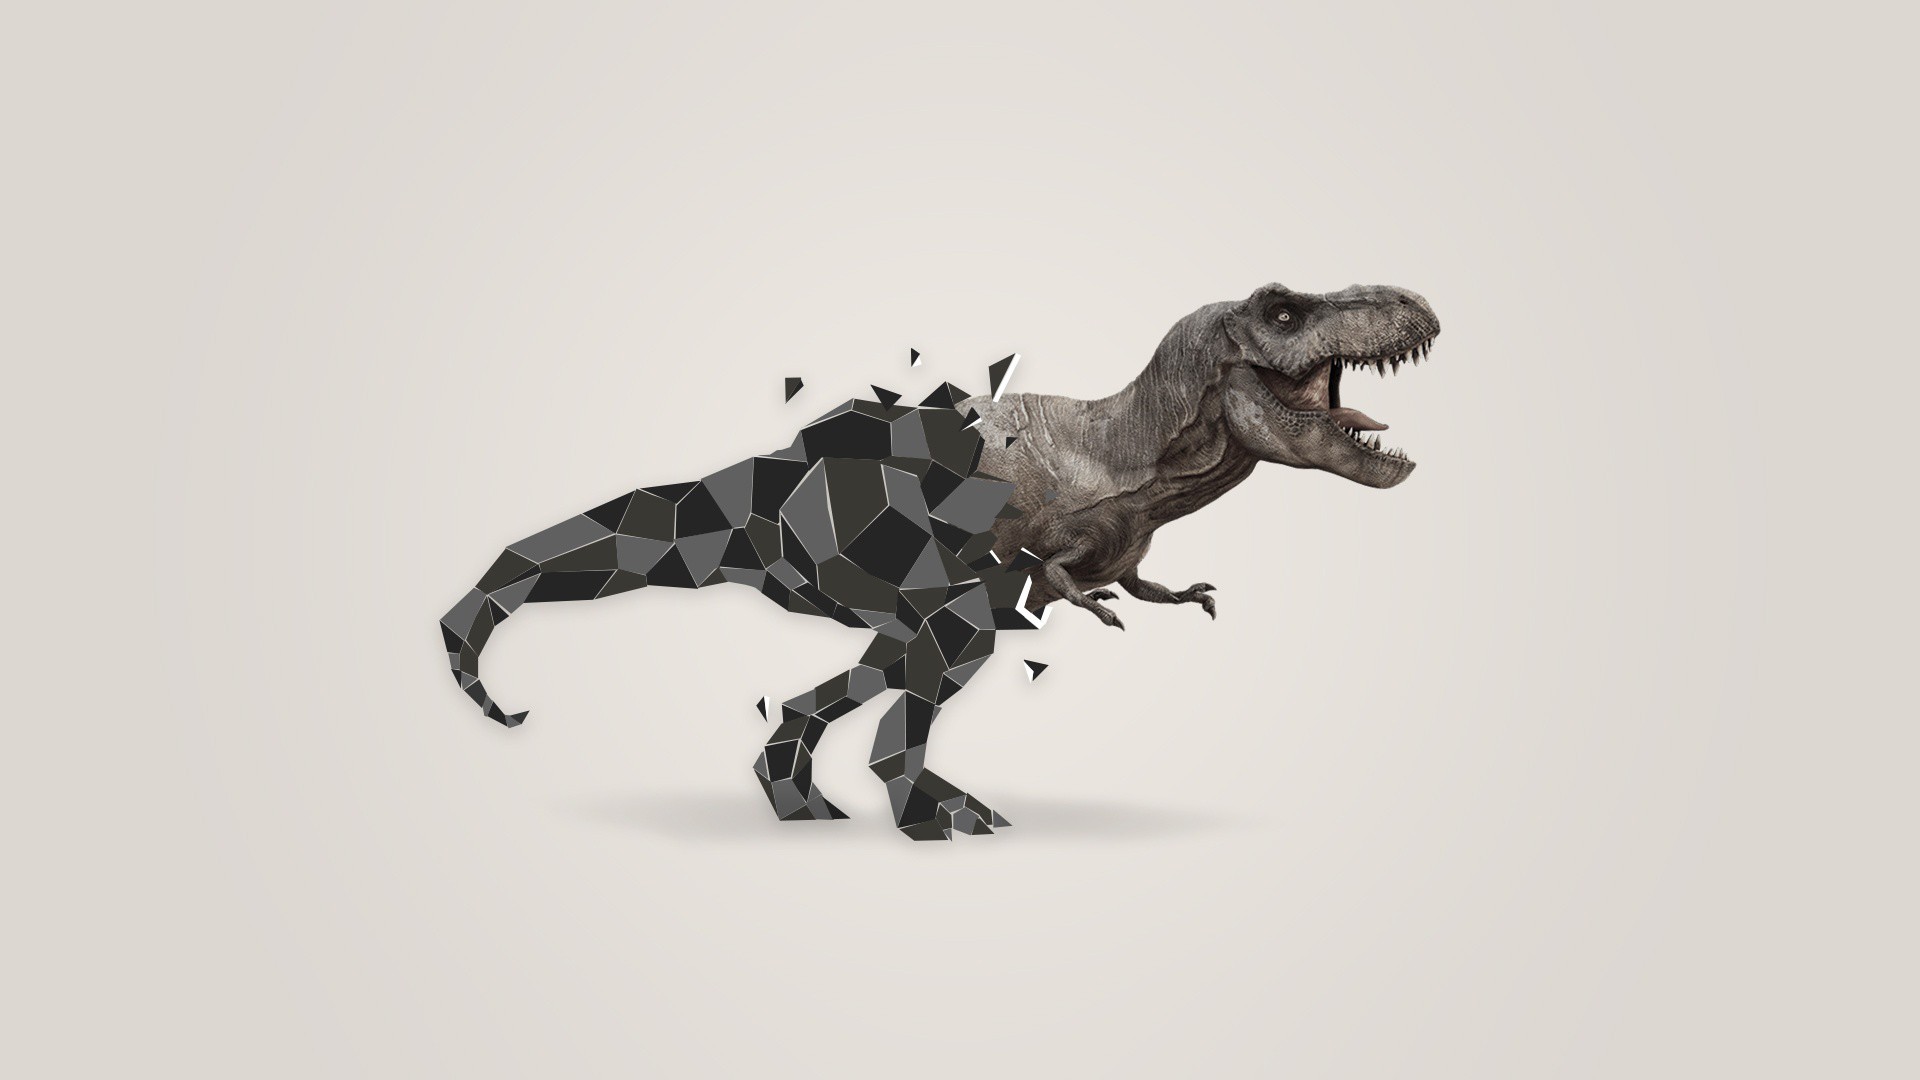 General 1920x1080 low poly dinosaurs digital art simple background animals white background